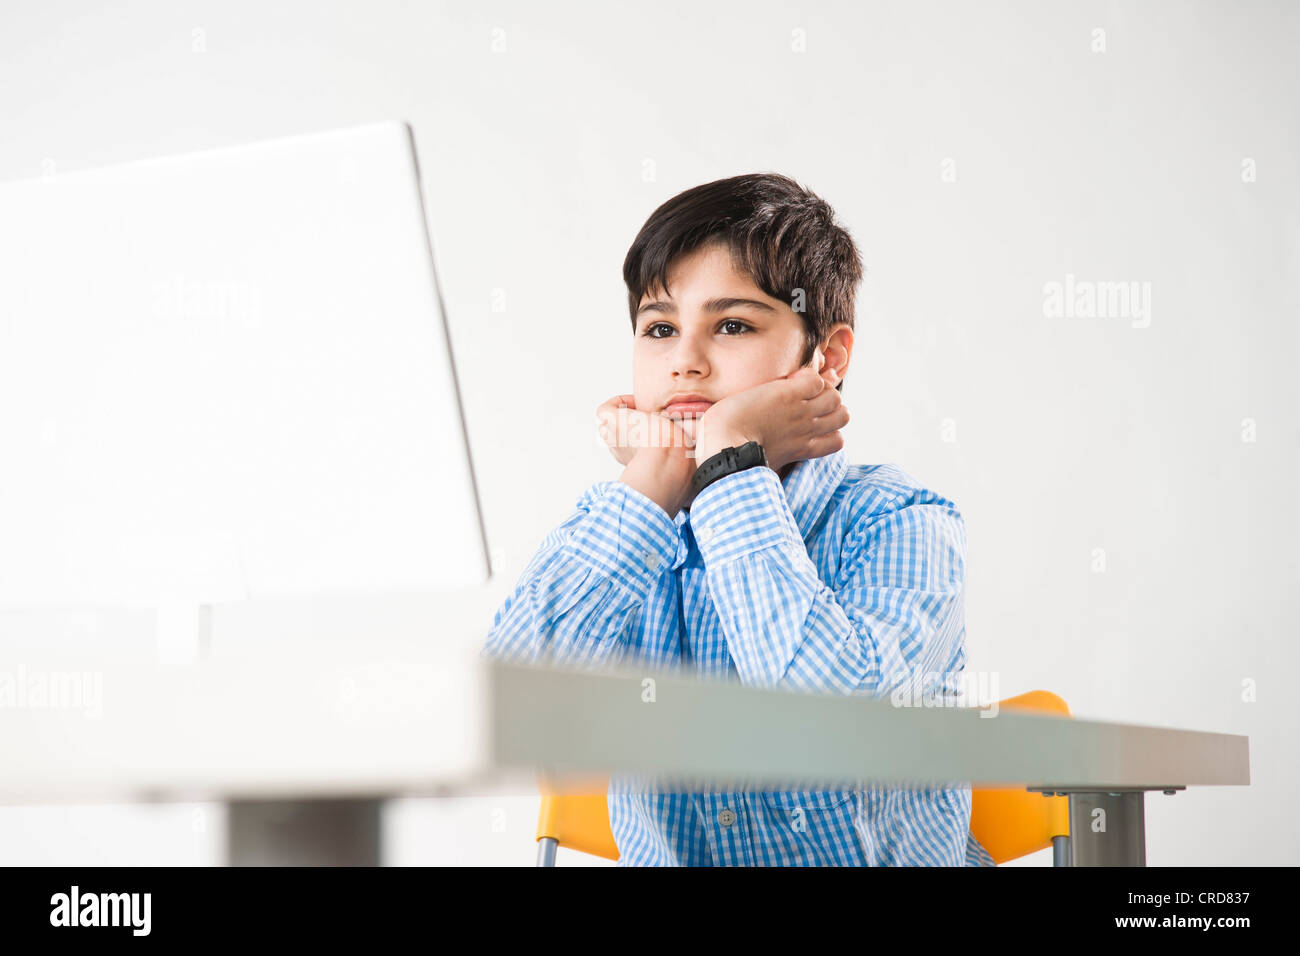 Teenage boy sitting in front of laptop Stock Photo